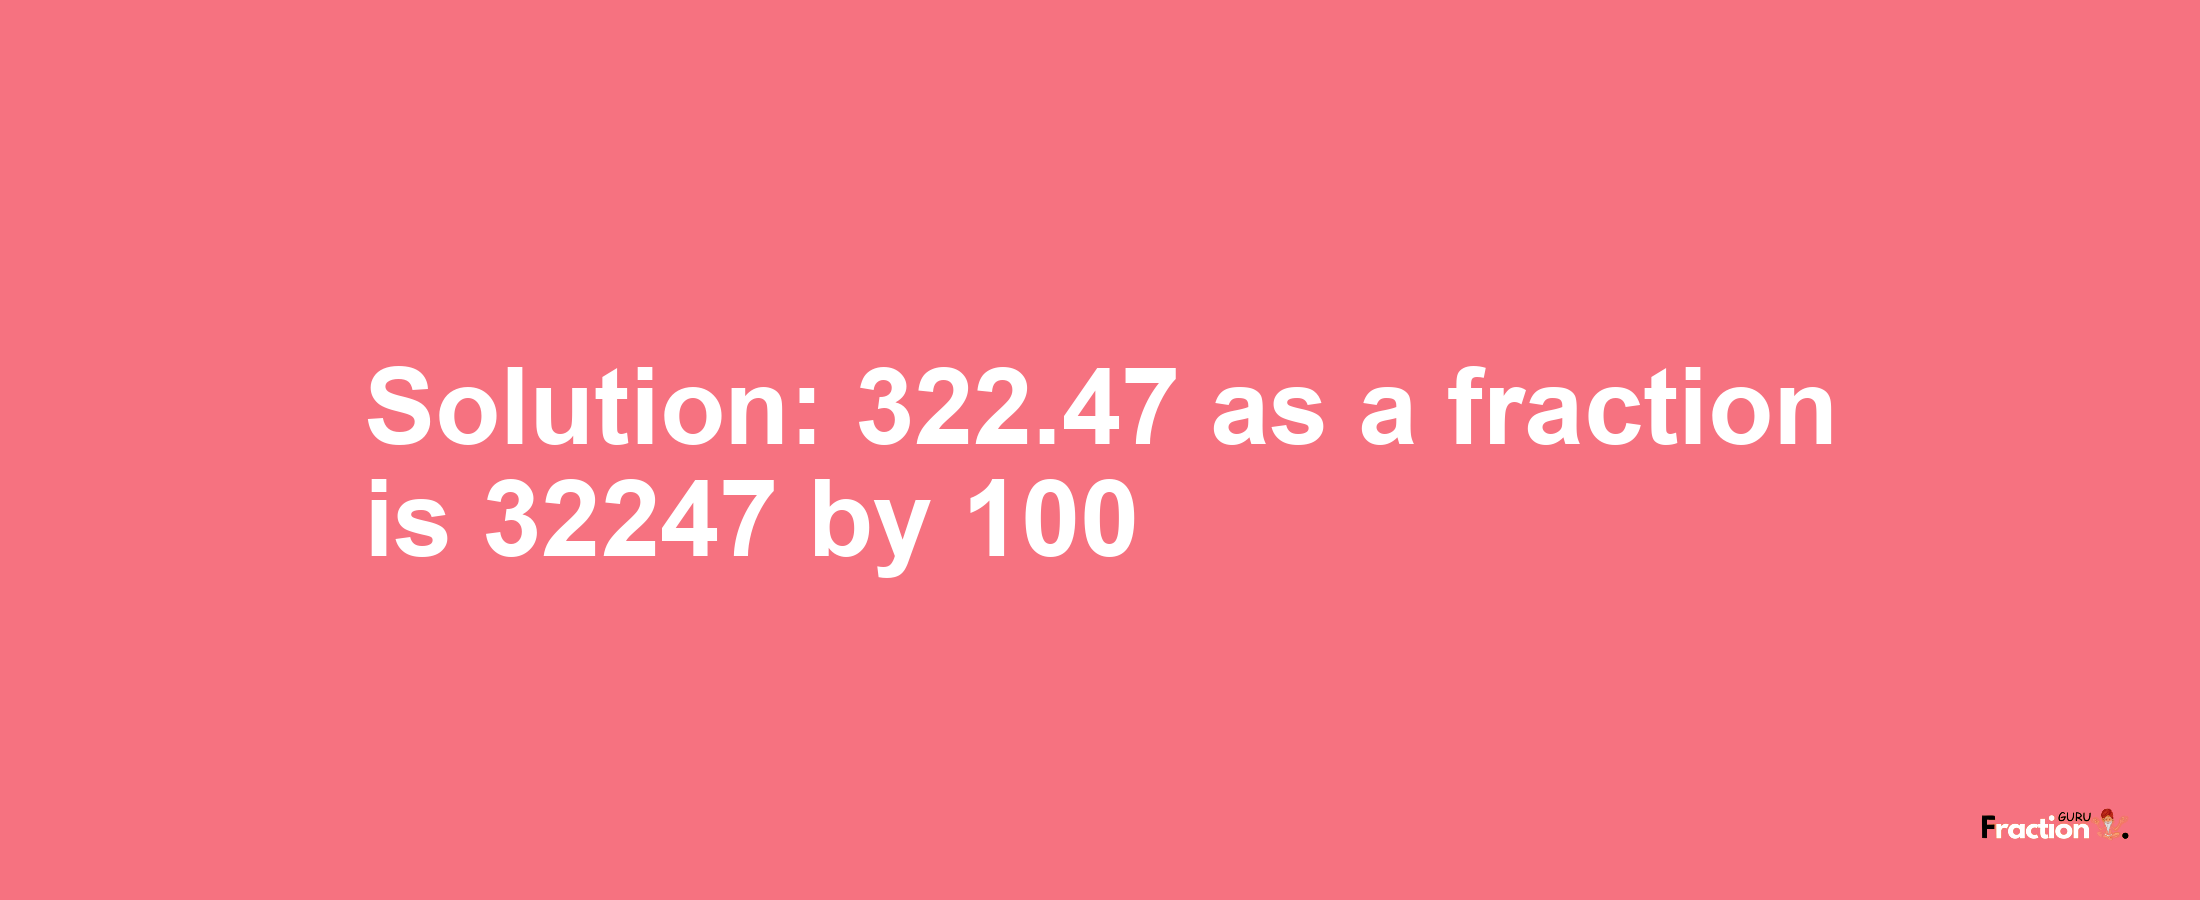 Solution:322.47 as a fraction is 32247/100